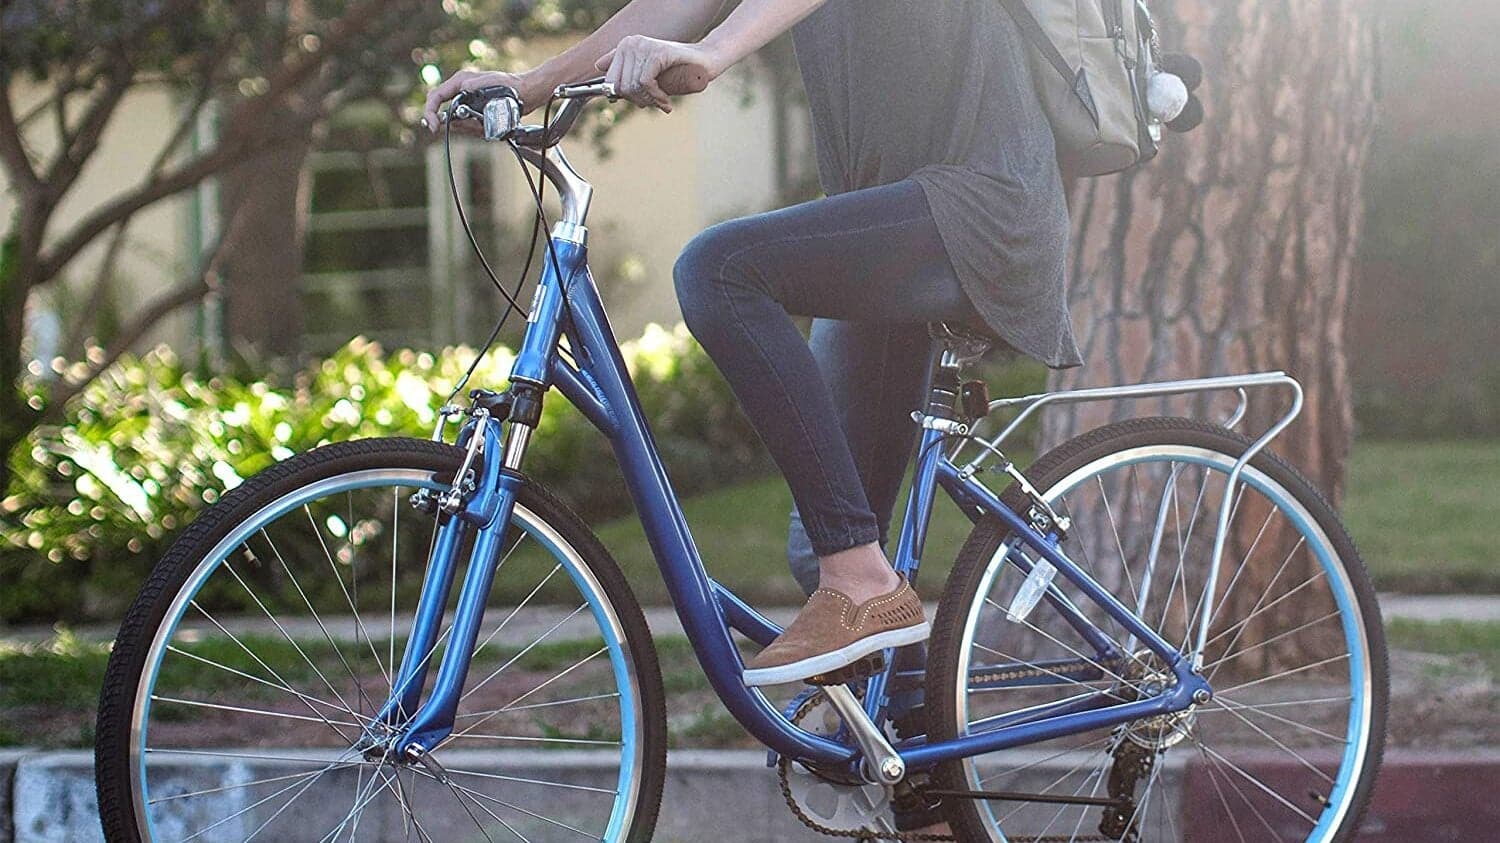 The Best Women’s Comfort Bikes (Review & Buying Guide) in 2022